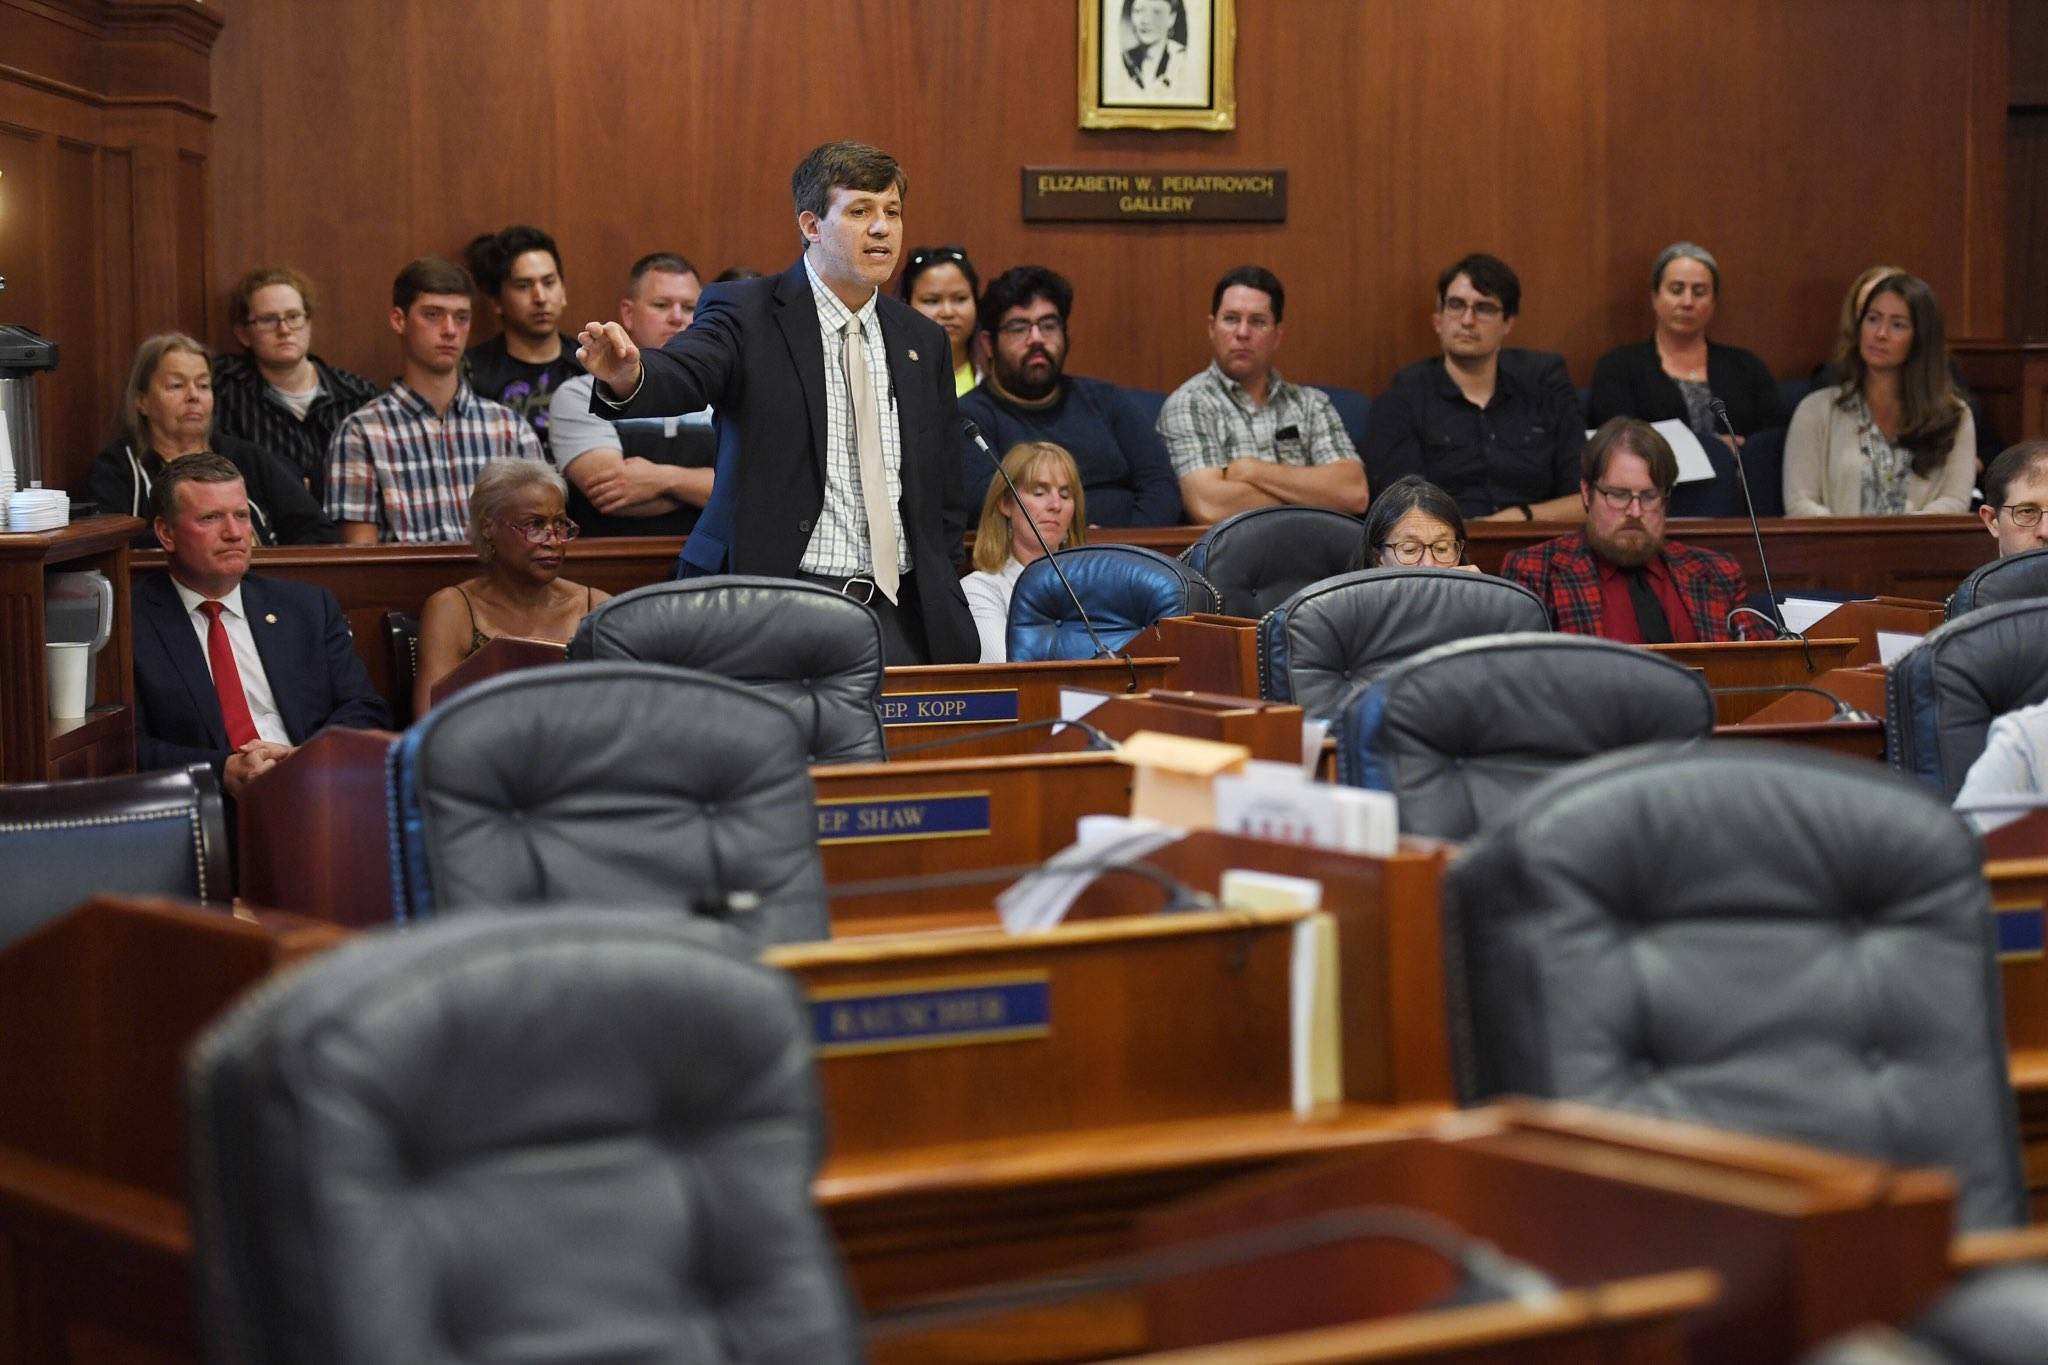 With empty legislator seats in front of him, Sen. Bill Wielechowski, D-Anchorage, speaks in favor of an override vote during a Joint Session of the Alaska Legislature to vote on an override of Gov. Mike Dunleavy’s budget vetoes at the Capitol on Wednesday, July 10, 2019. (Michael Penn | Juneau Empire)